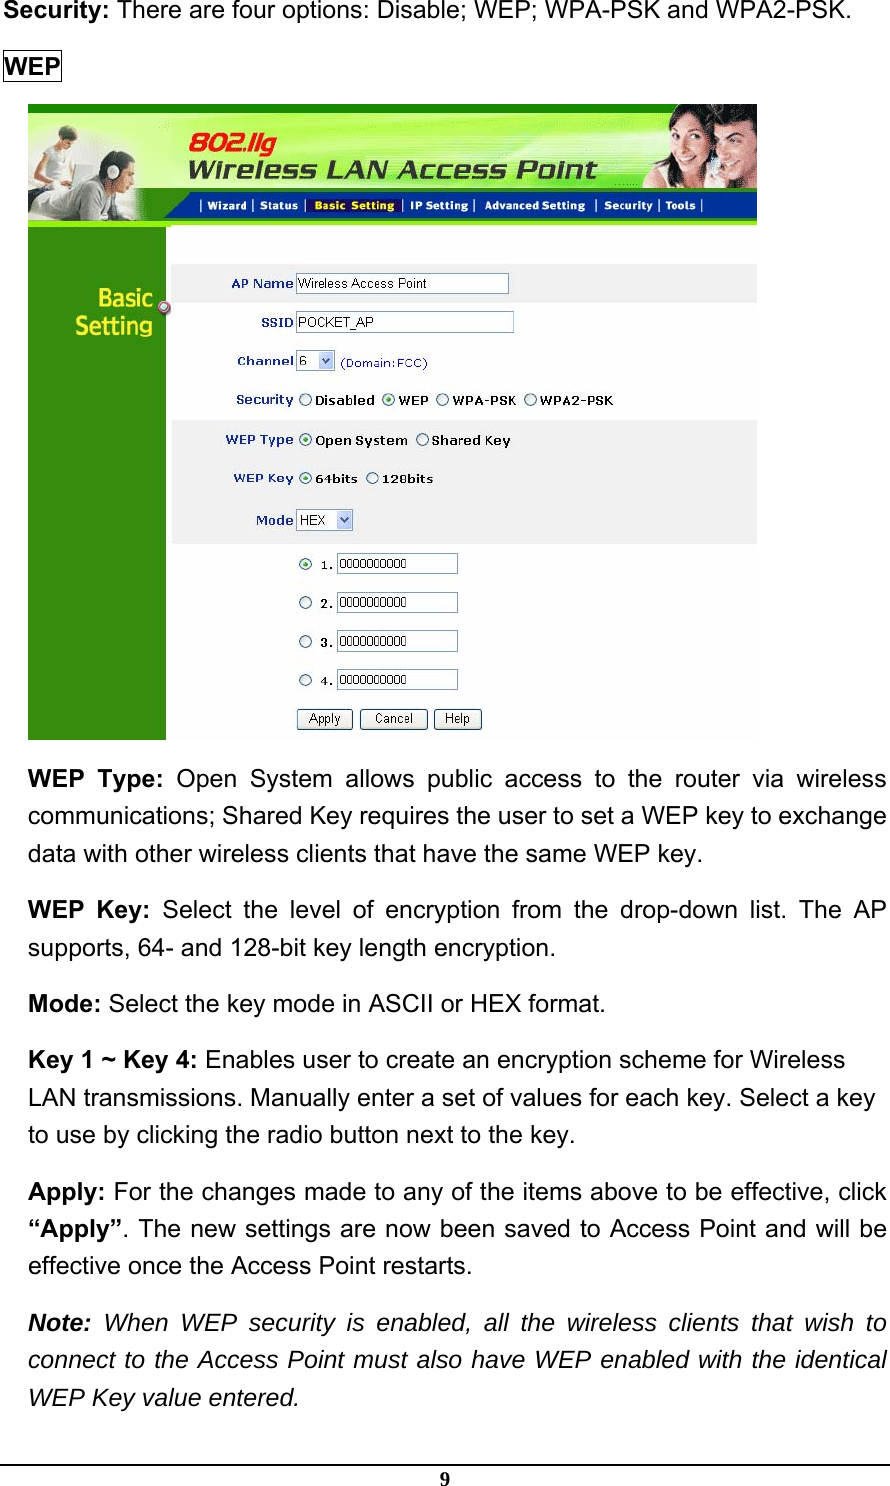 9 Security: There are four options: Disable; WEP; WPA-PSK and WPA2-PSK.     WEP  WEP Type: Open System allows public access to the router via wireless communications; Shared Key requires the user to set a WEP key to exchange data with other wireless clients that have the same WEP key. WEP Key: Select the level of encryption from the drop-down list. The AP supports, 64- and 128-bit key length encryption. Mode: Select the key mode in ASCII or HEX format. Key 1 ~ Key 4: Enables user to create an encryption scheme for Wireless LAN transmissions. Manually enter a set of values for each key. Select a key to use by clicking the radio button next to the key. Apply: For the changes made to any of the items above to be effective, click “Apply”. The new settings are now been saved to Access Point and will be effective once the Access Point restarts. Note: When WEP security is enabled, all the wireless clients that wish to connect to the Access Point must also have WEP enabled with the identical WEP Key value entered. 